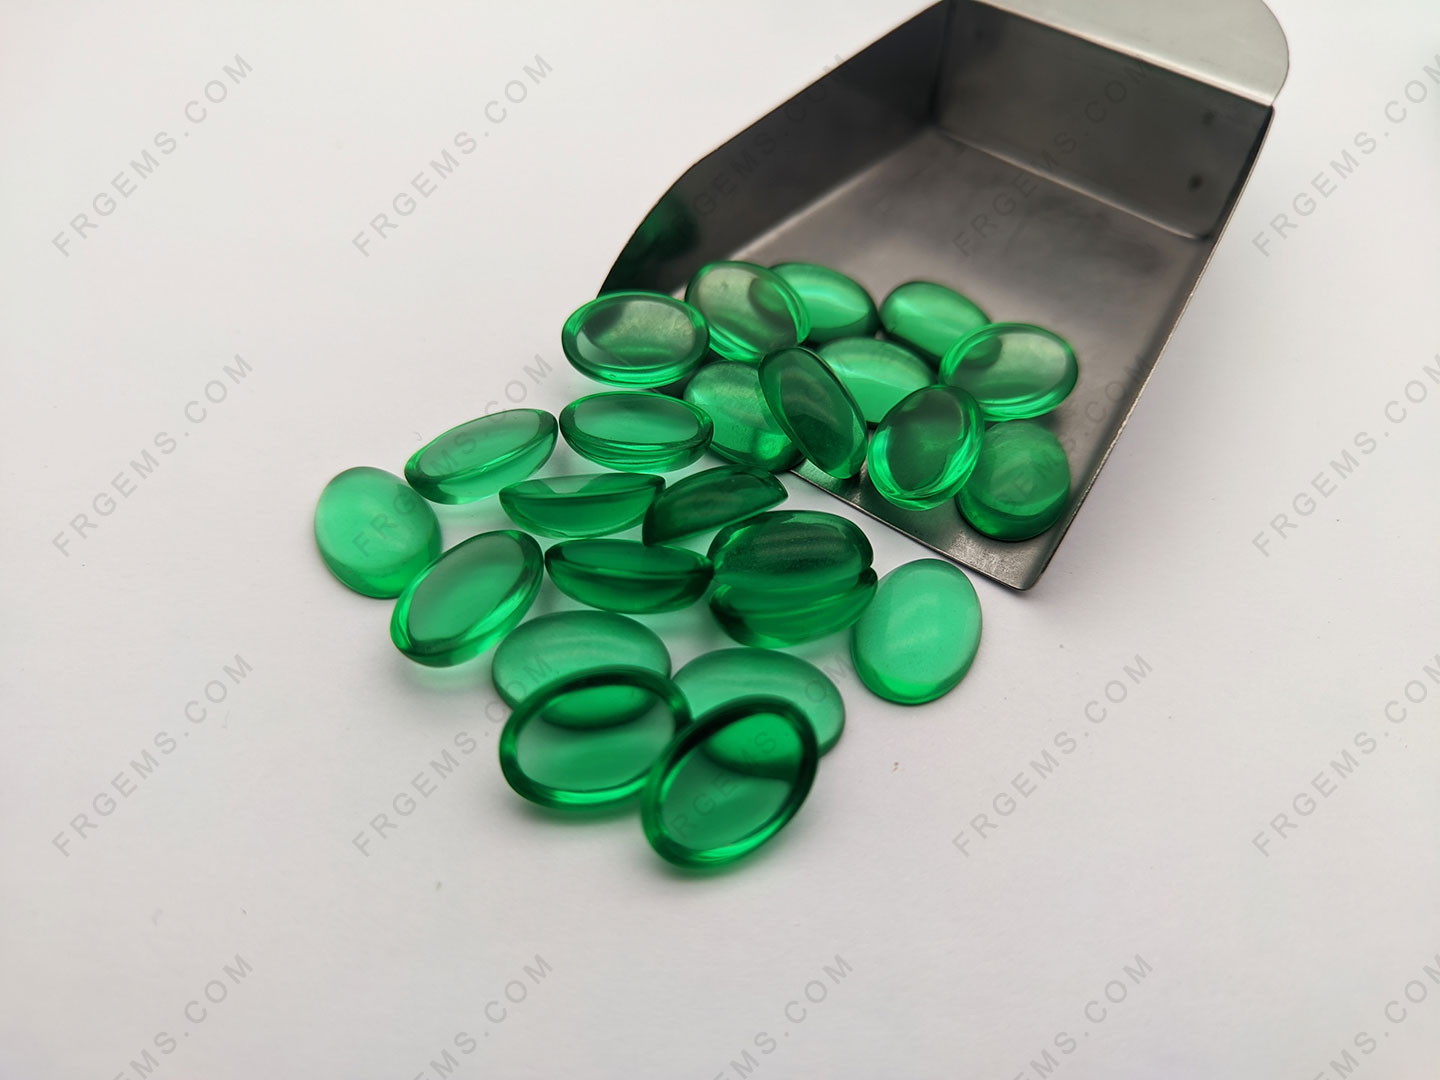 China Glass Emerald Green Color Oval Shape Cabochon Loose Gemstones wholesale